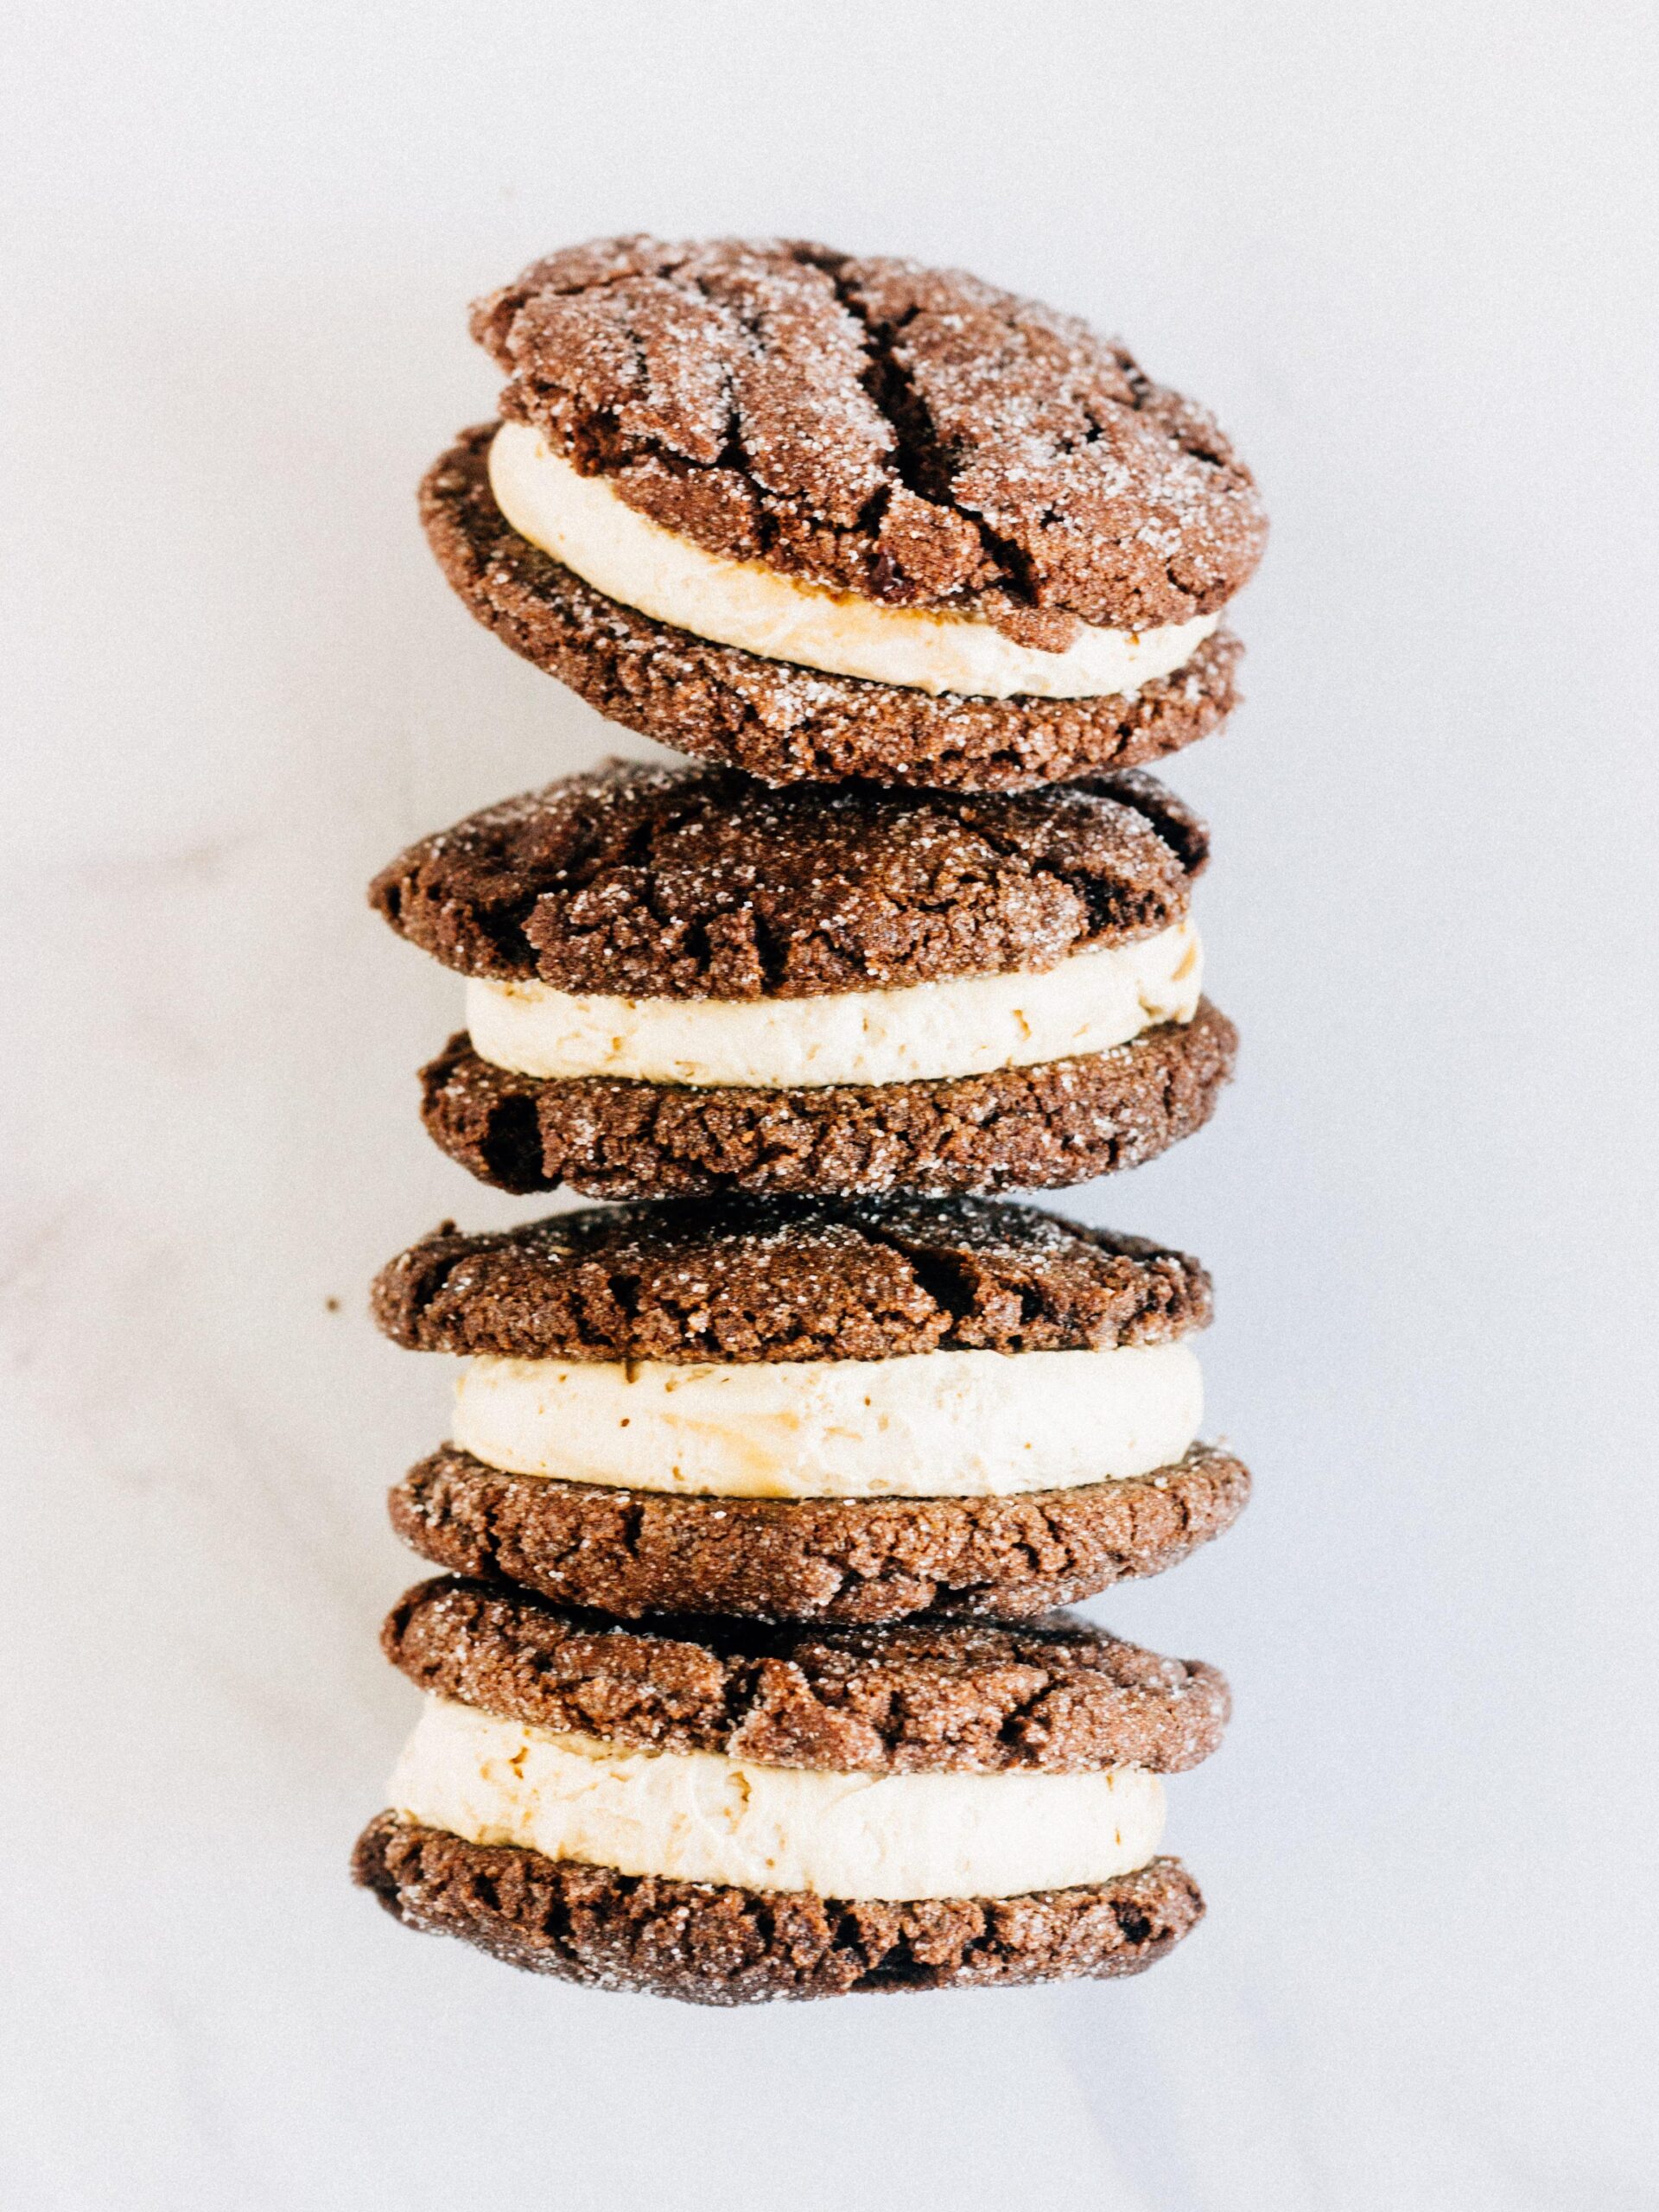  These cookies are so tempting that you won't stop at just one.